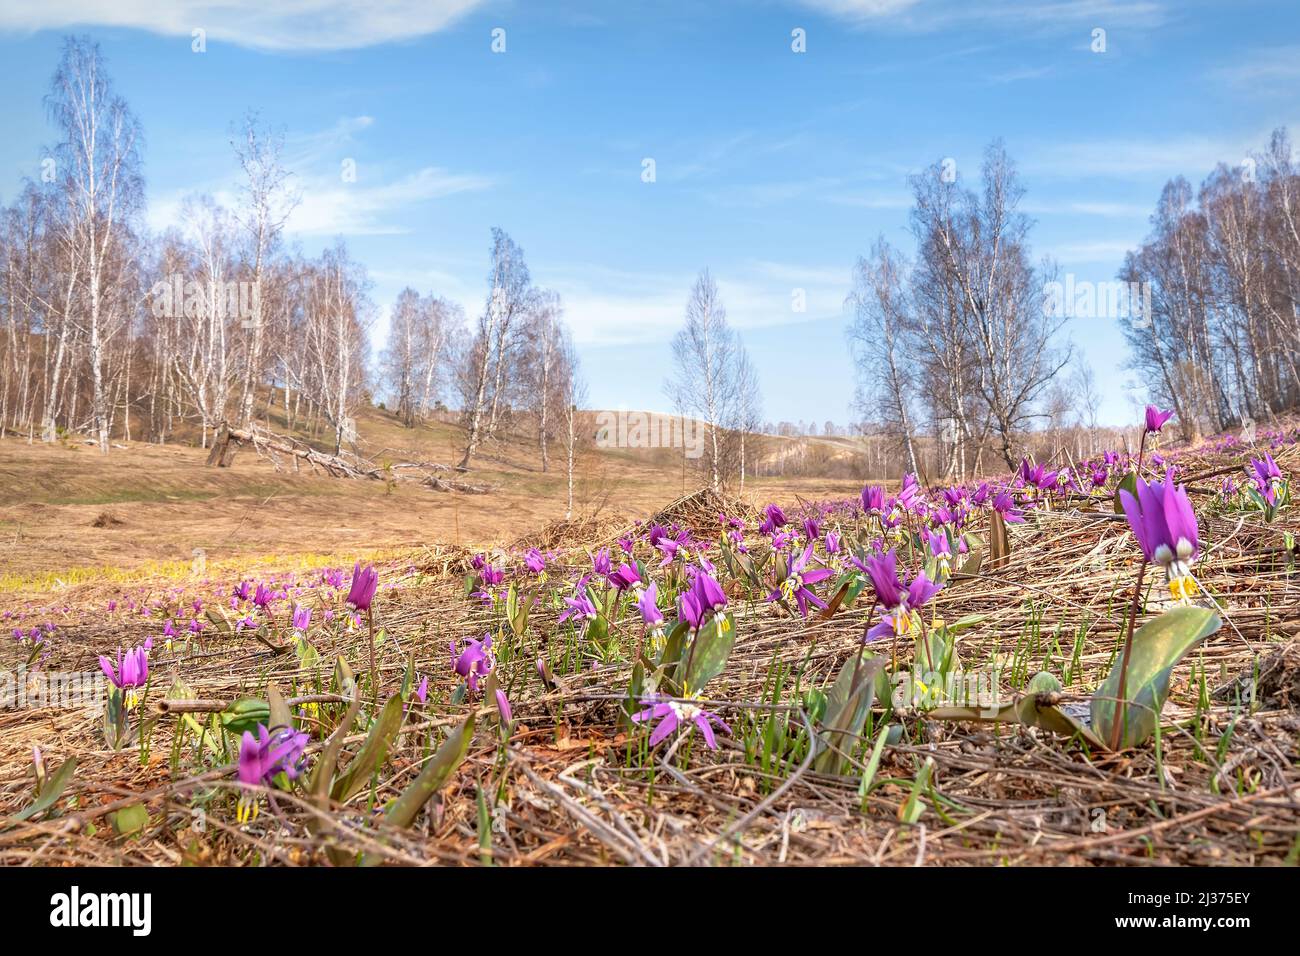 Amazing spring magenta wild flowers dogtooth violet (Erythronium sibiricum) close up in a meadow in dry grass. Altai, Russia Stock Photo